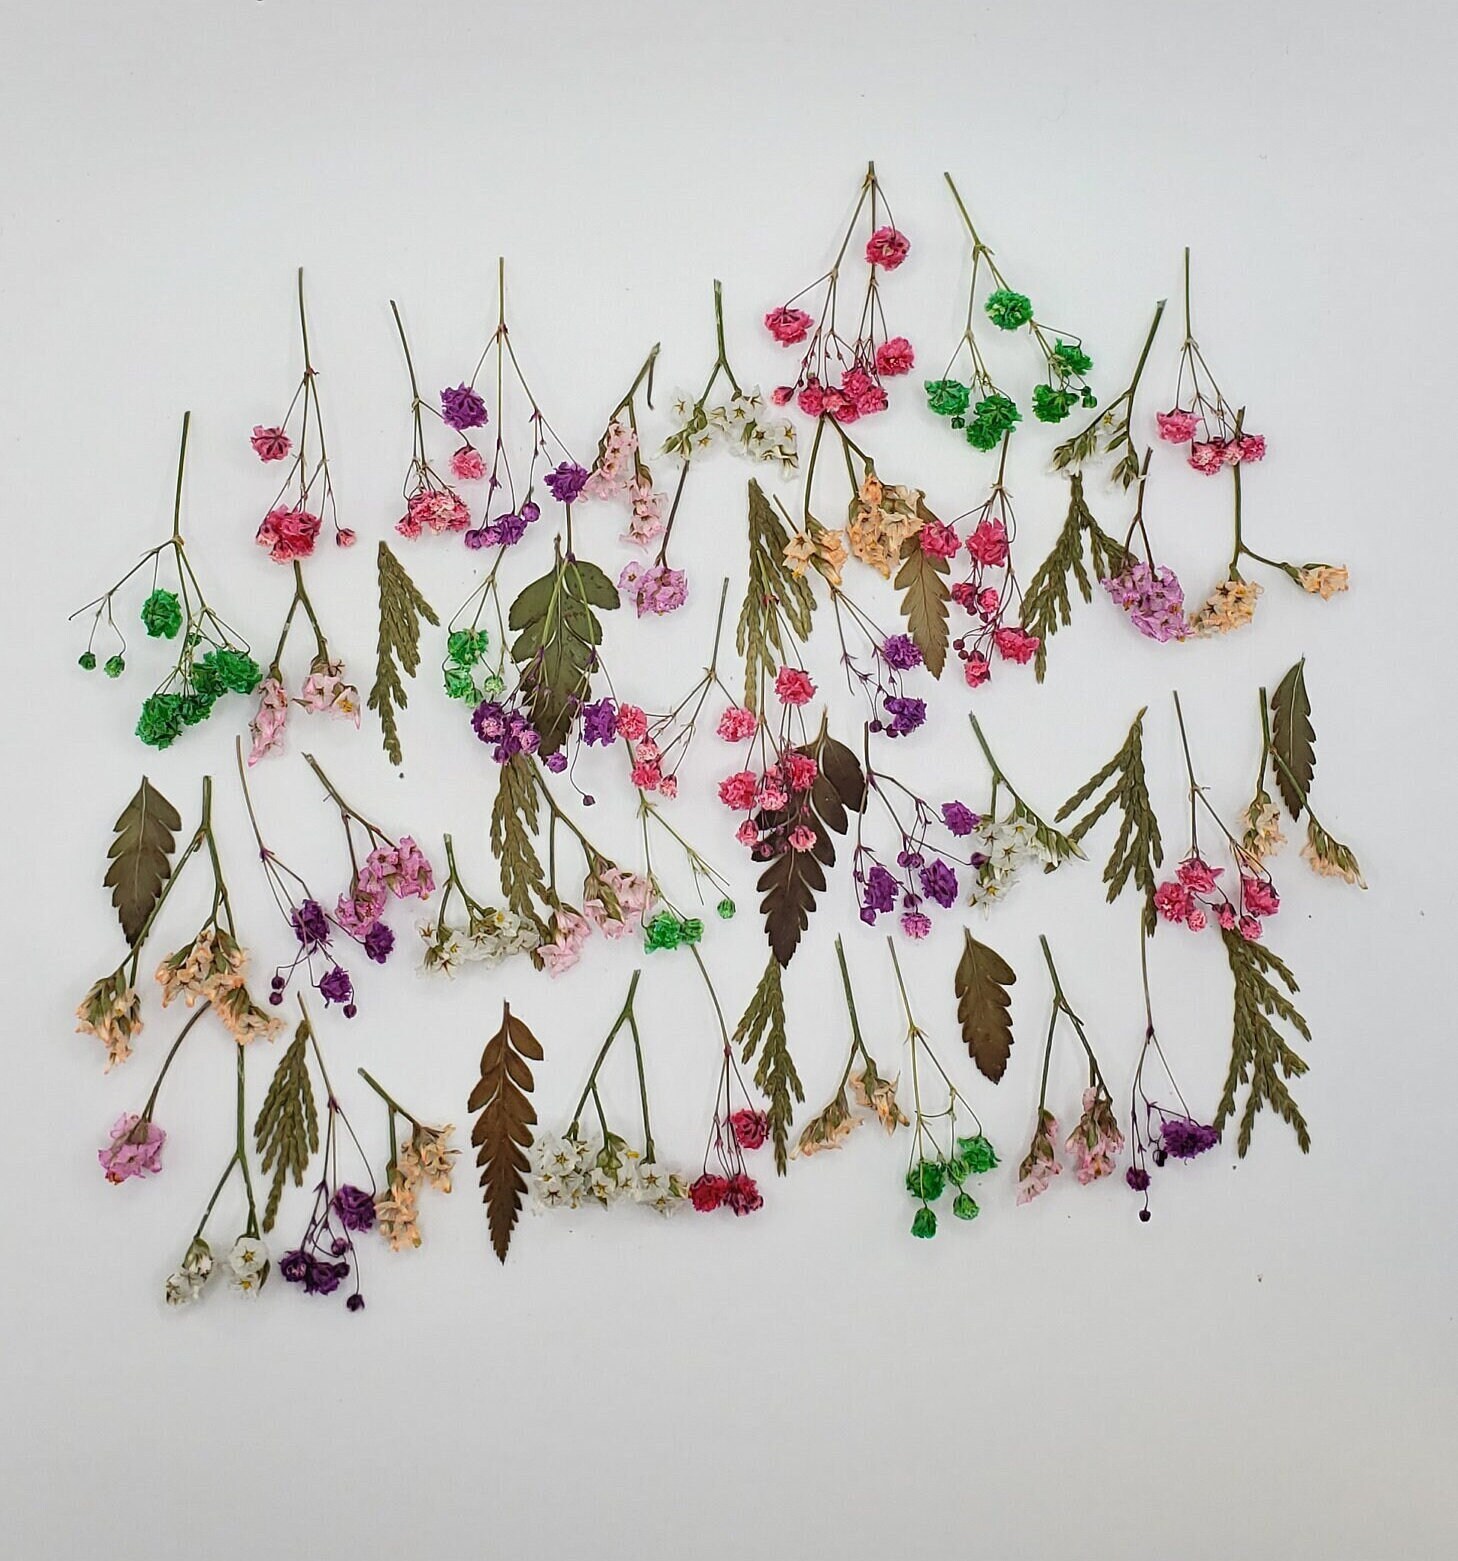 Dried Daisies Poster - Dried flowers 